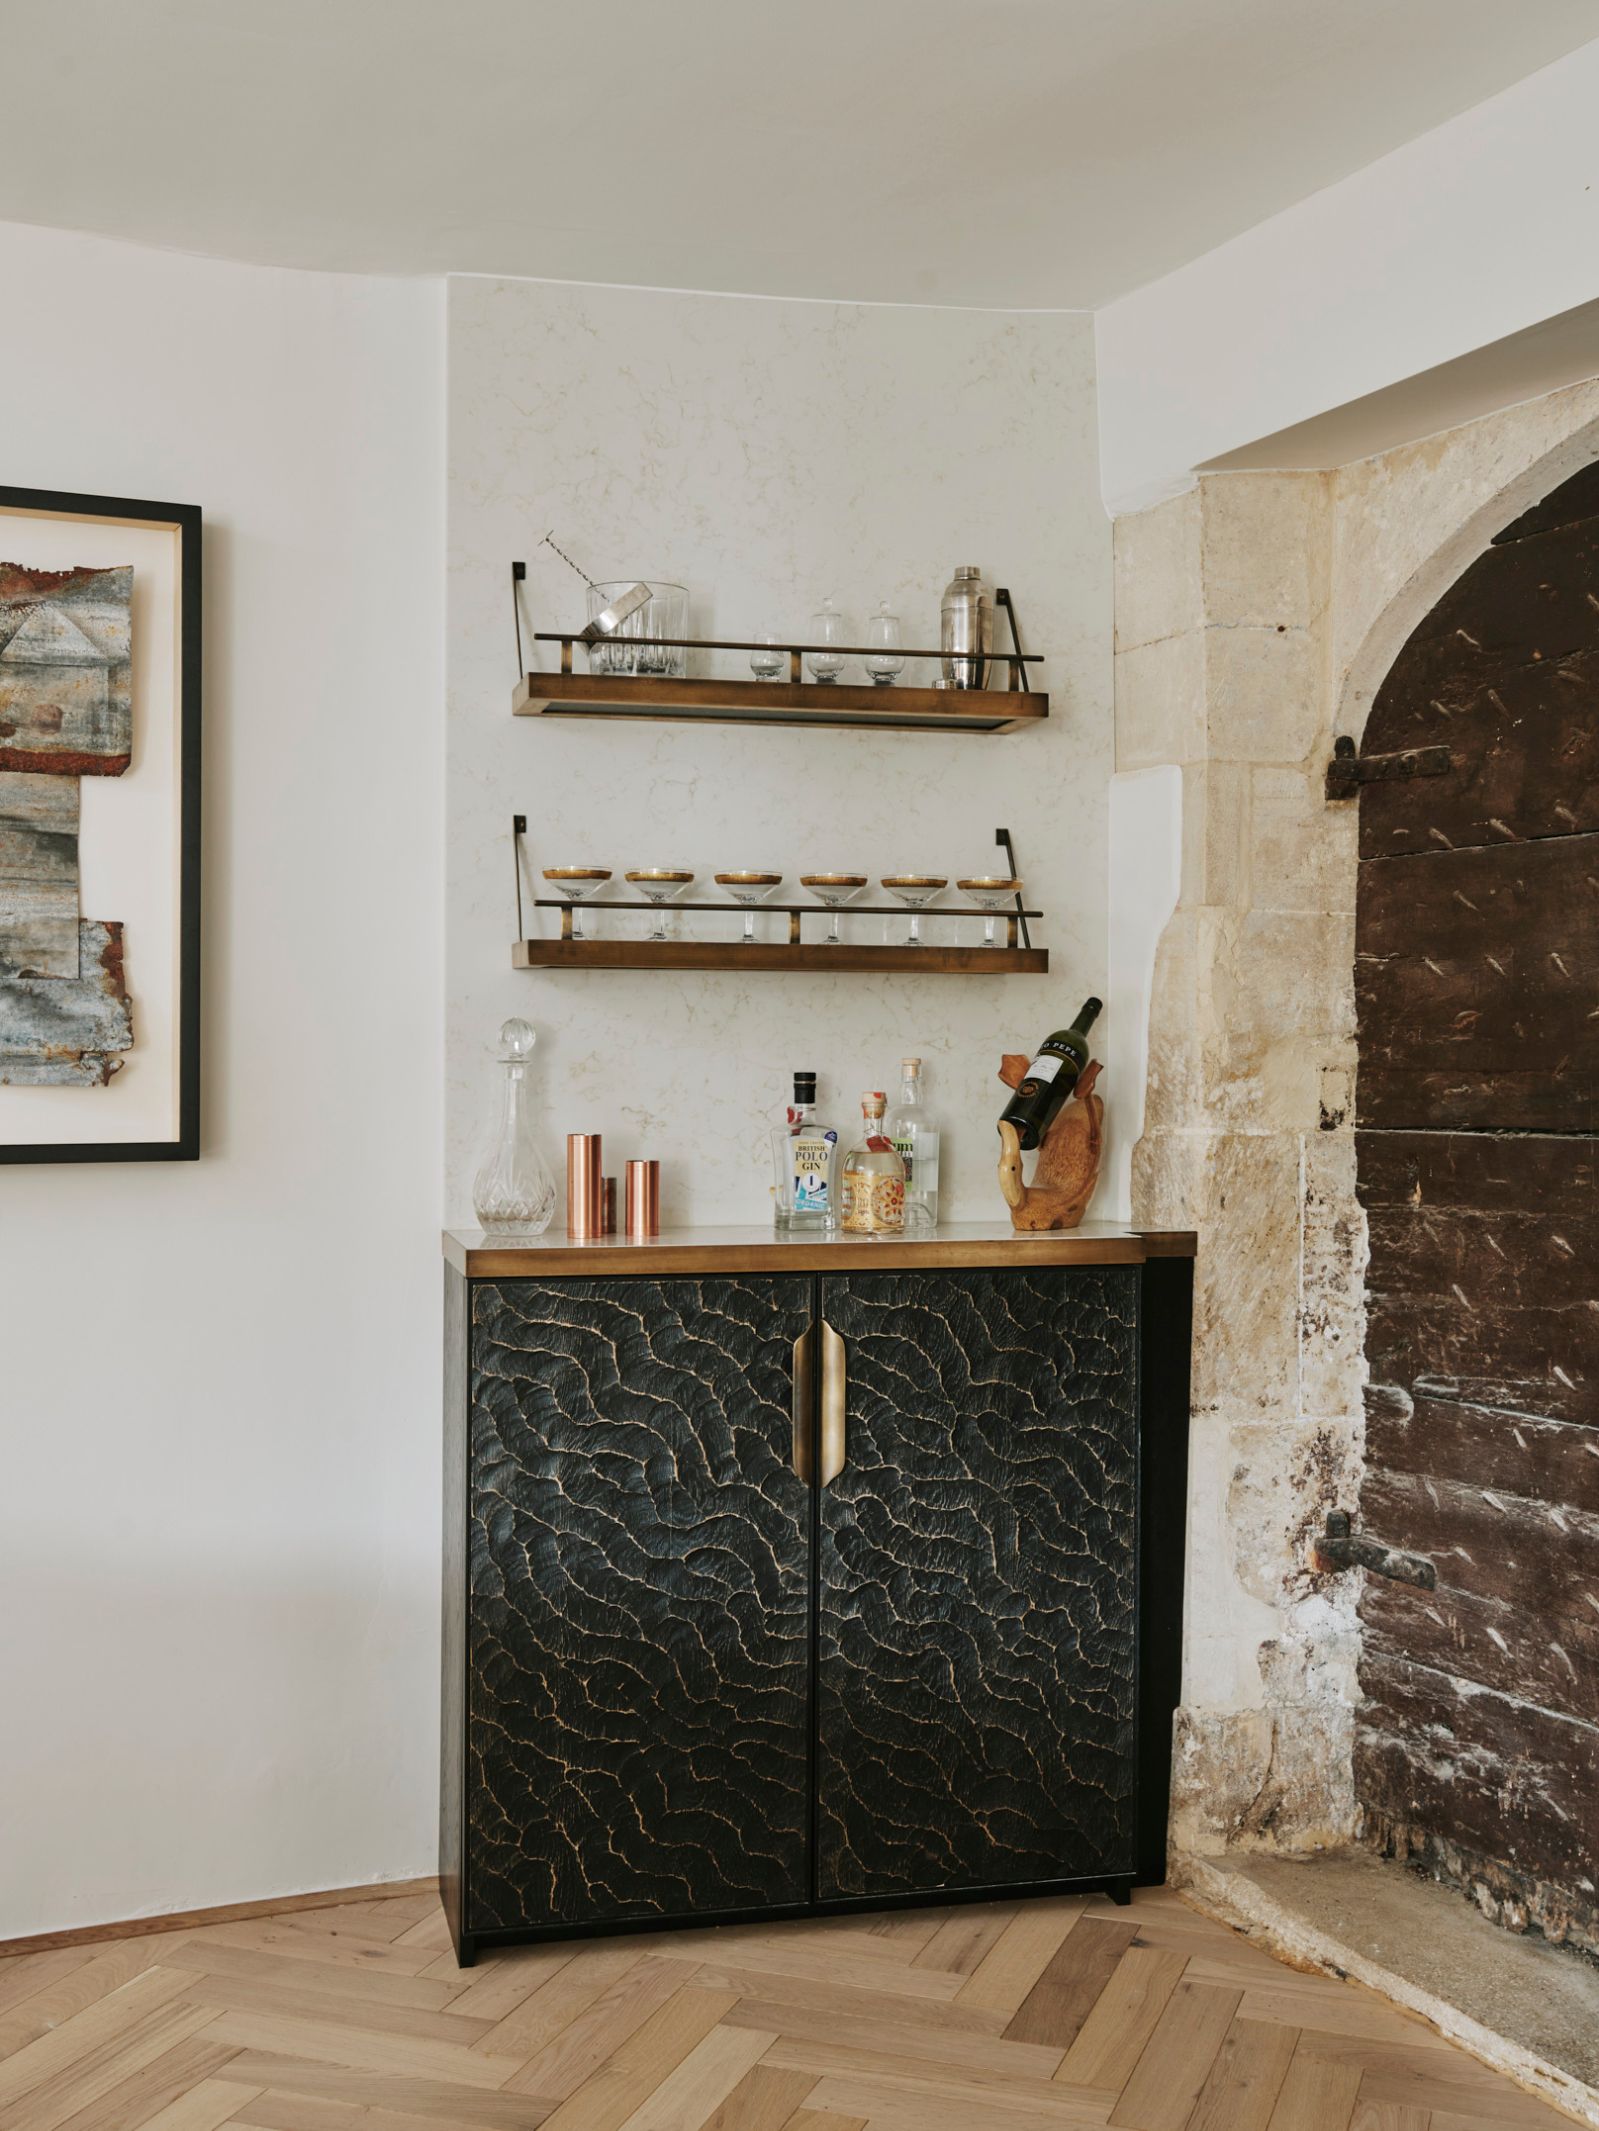 kitchen redesigned, Back in Time for the Stroud Kitchen from Ledbury Studio